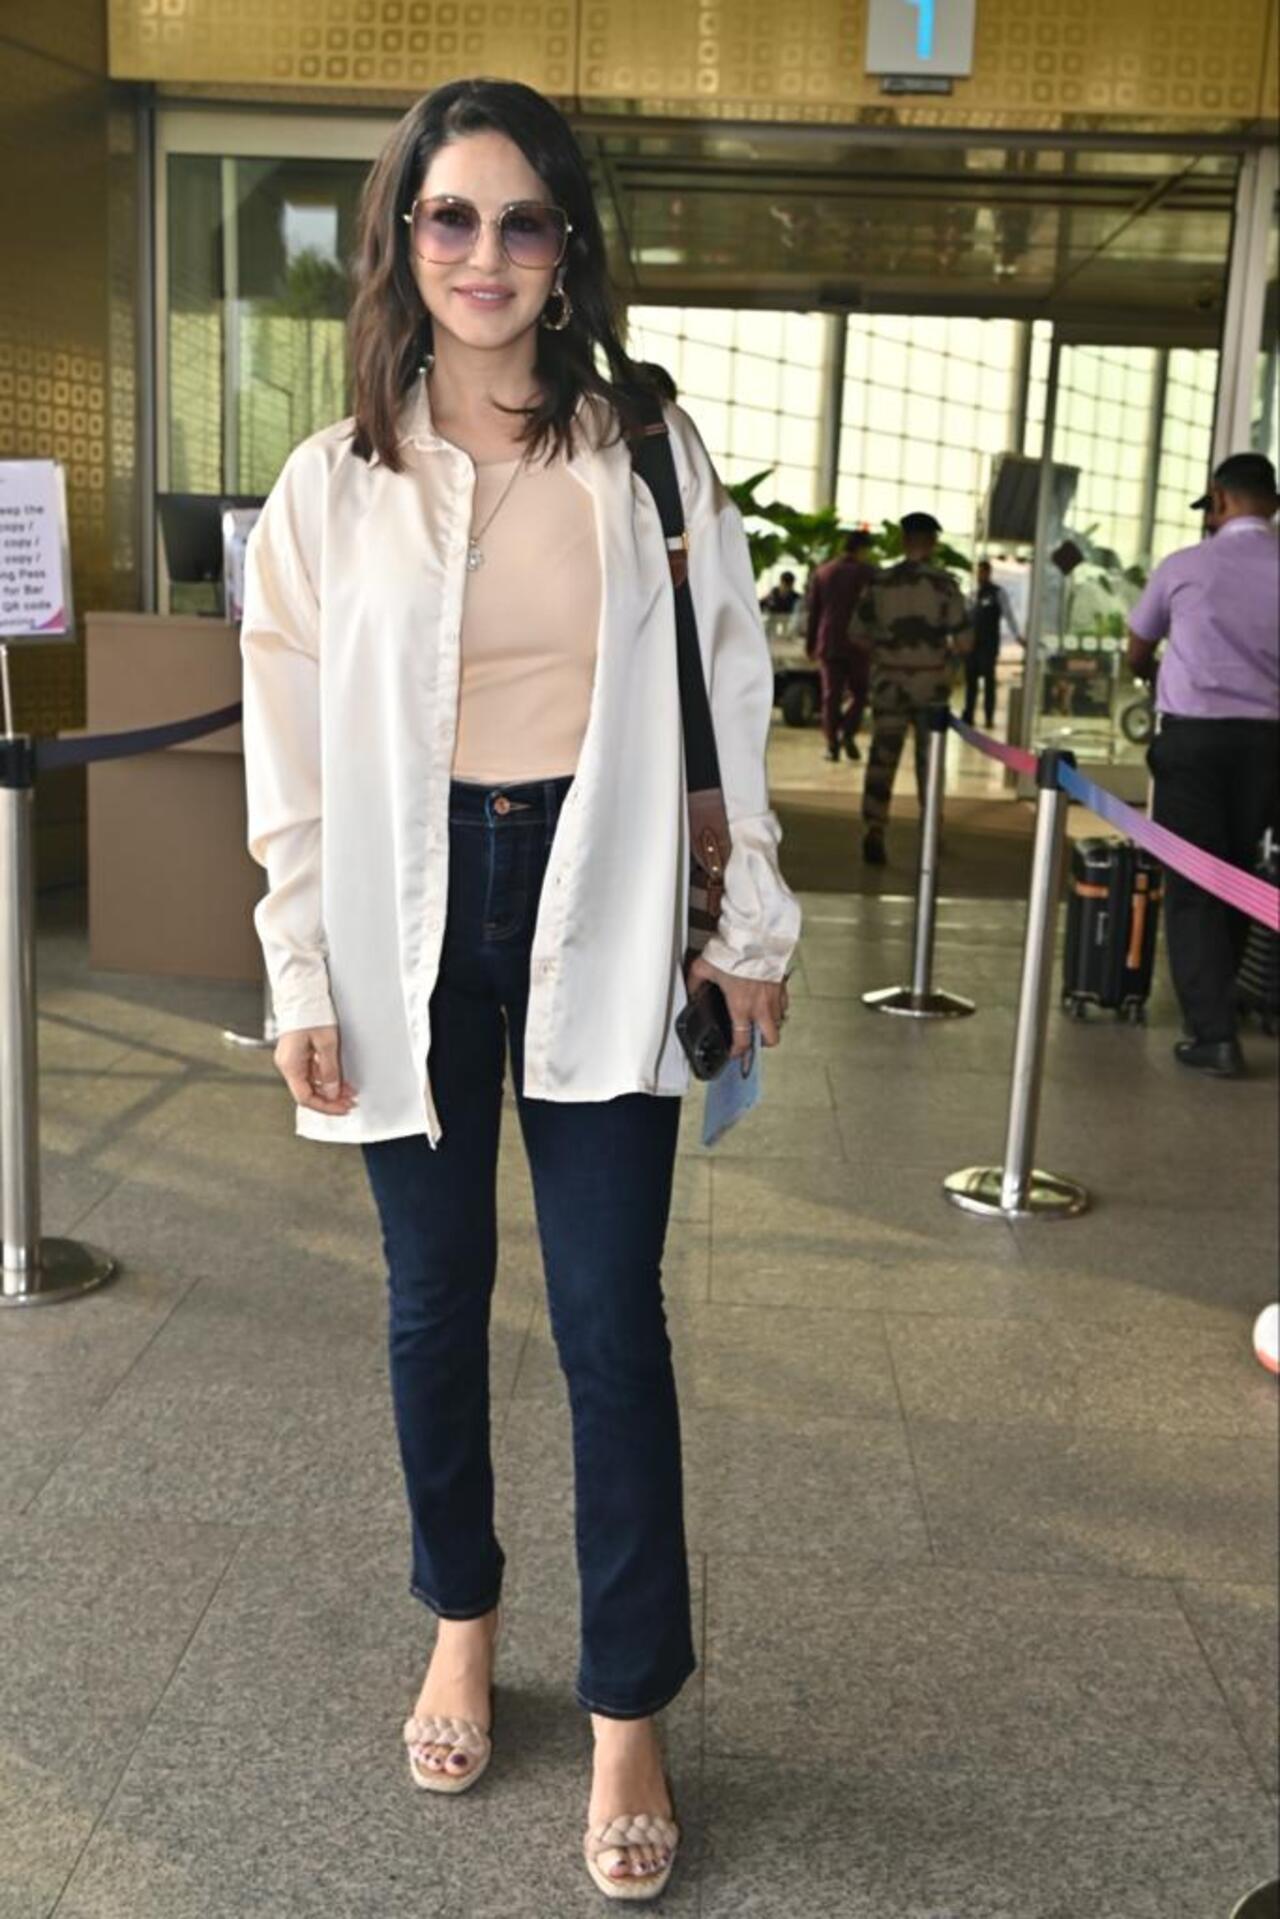 She was dressed in a pastel coloured top paired with a white jacket and black pants